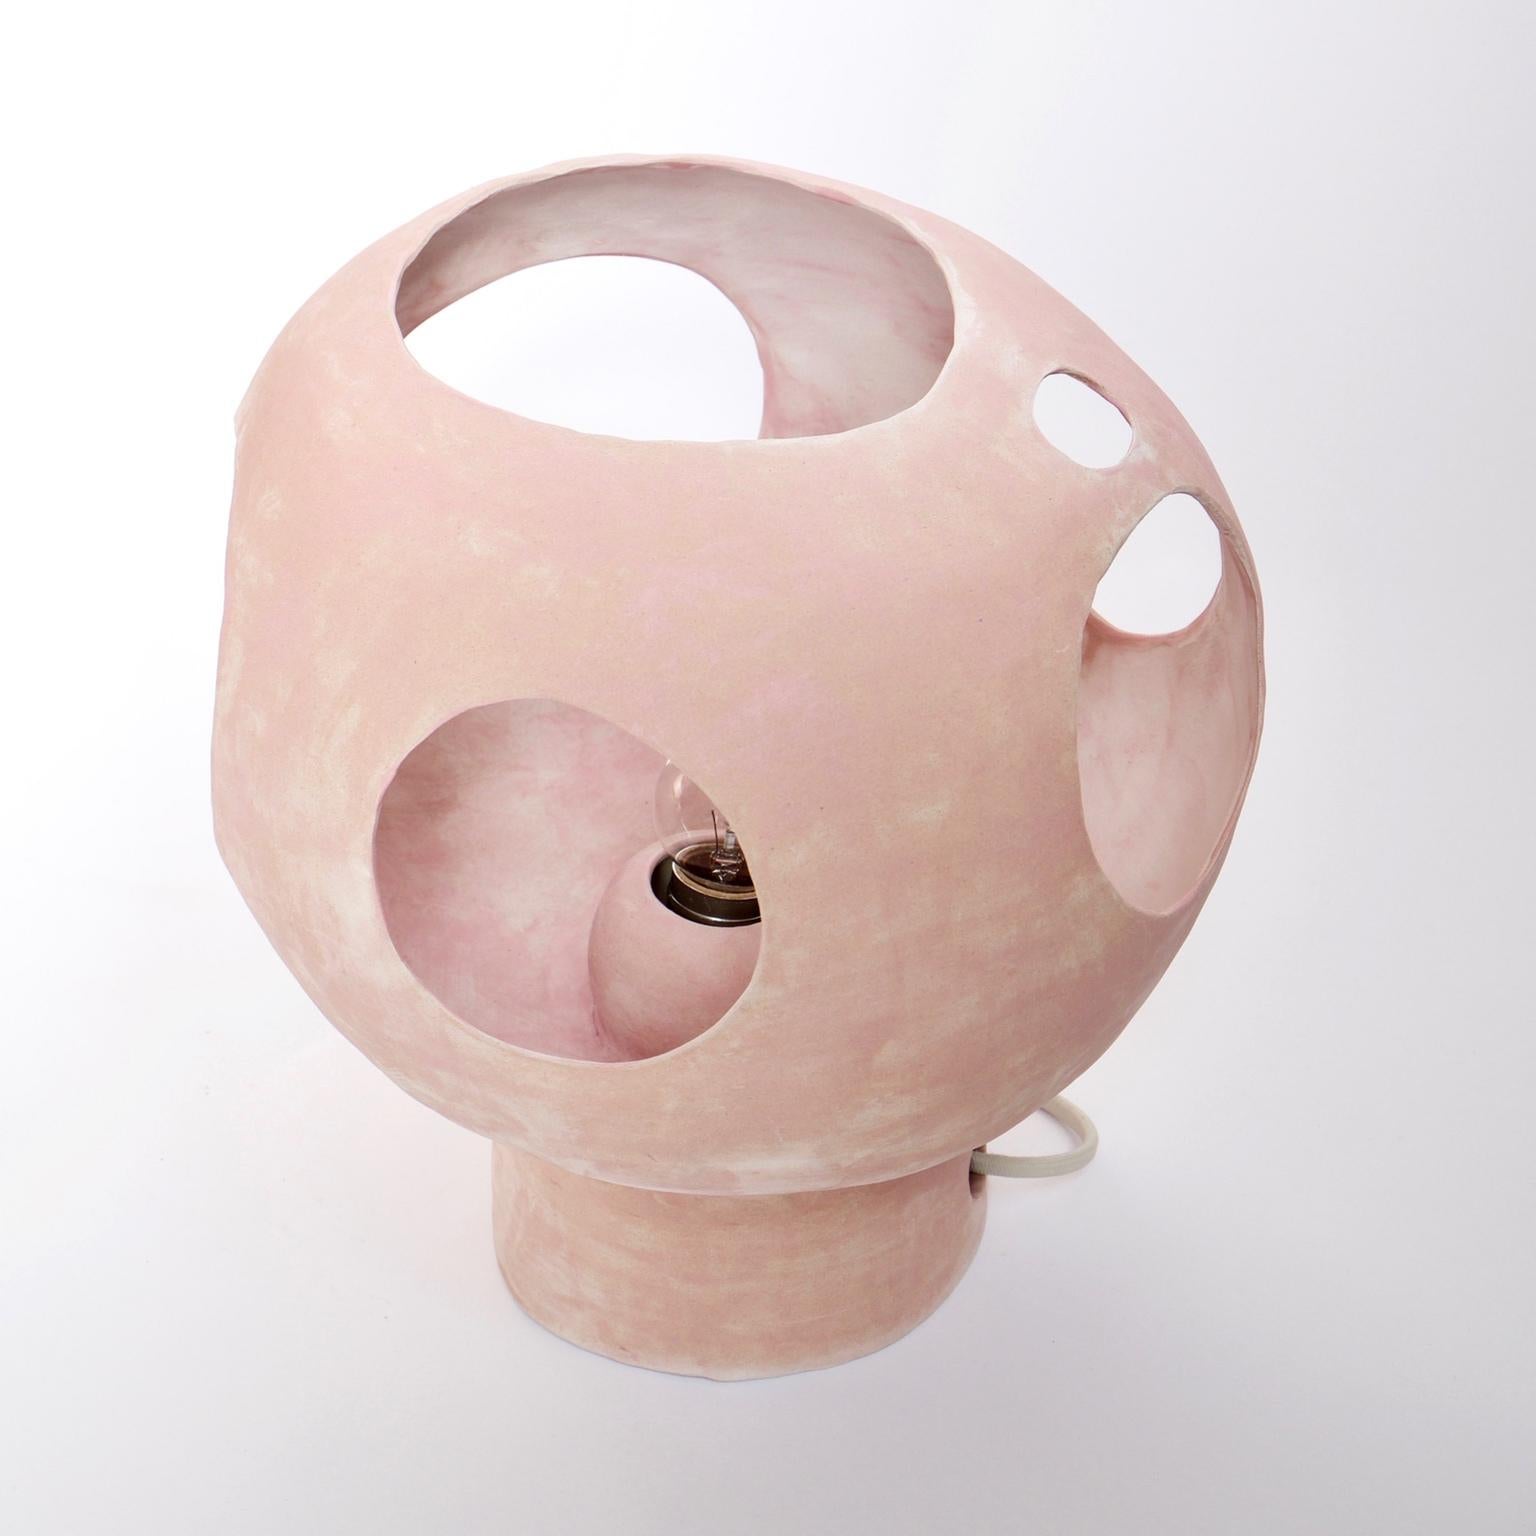 Fired Contemporary Sculptural Hand-built Ceramic Dome Table Lamp in Matte Pink